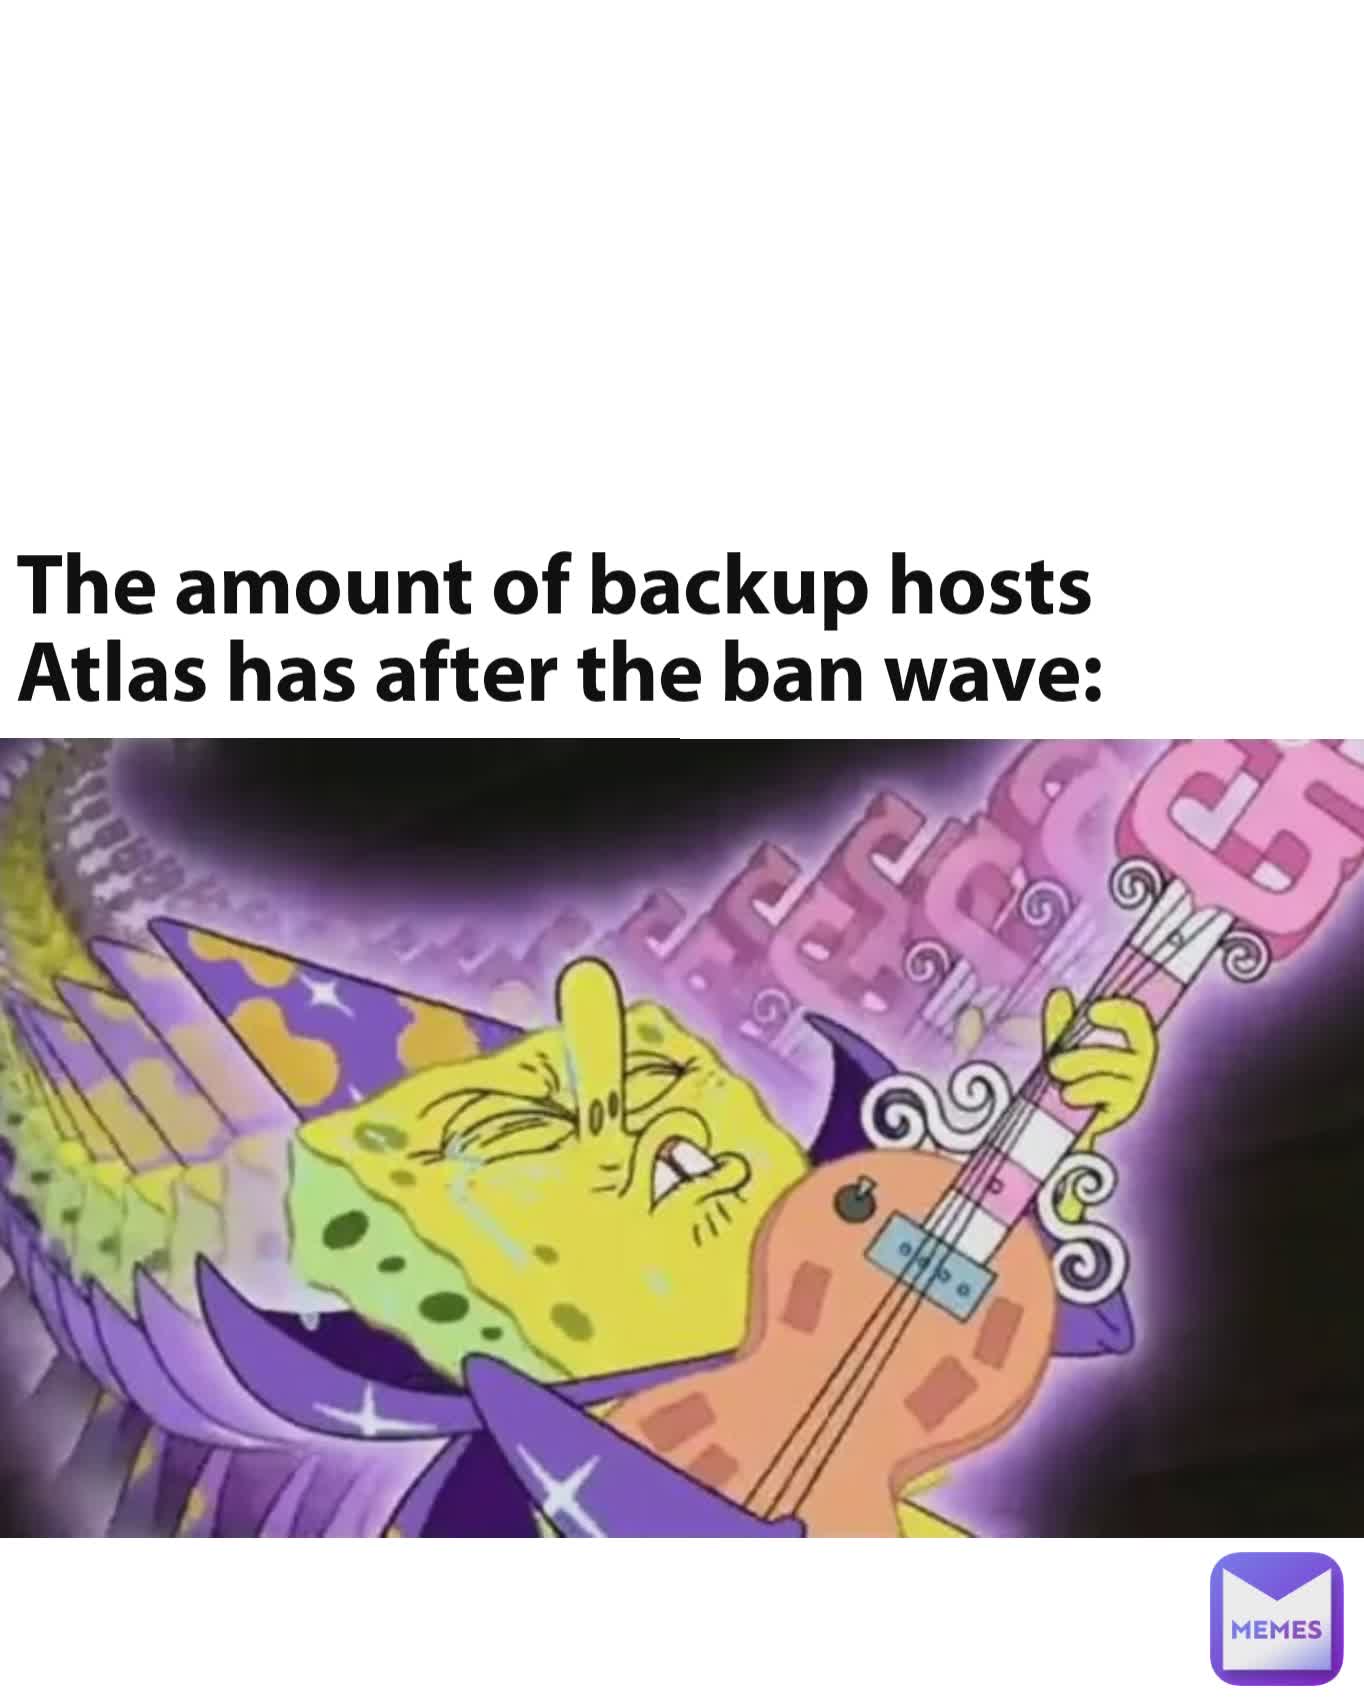 The amount of backup hosts Atlas has after the ban wave: